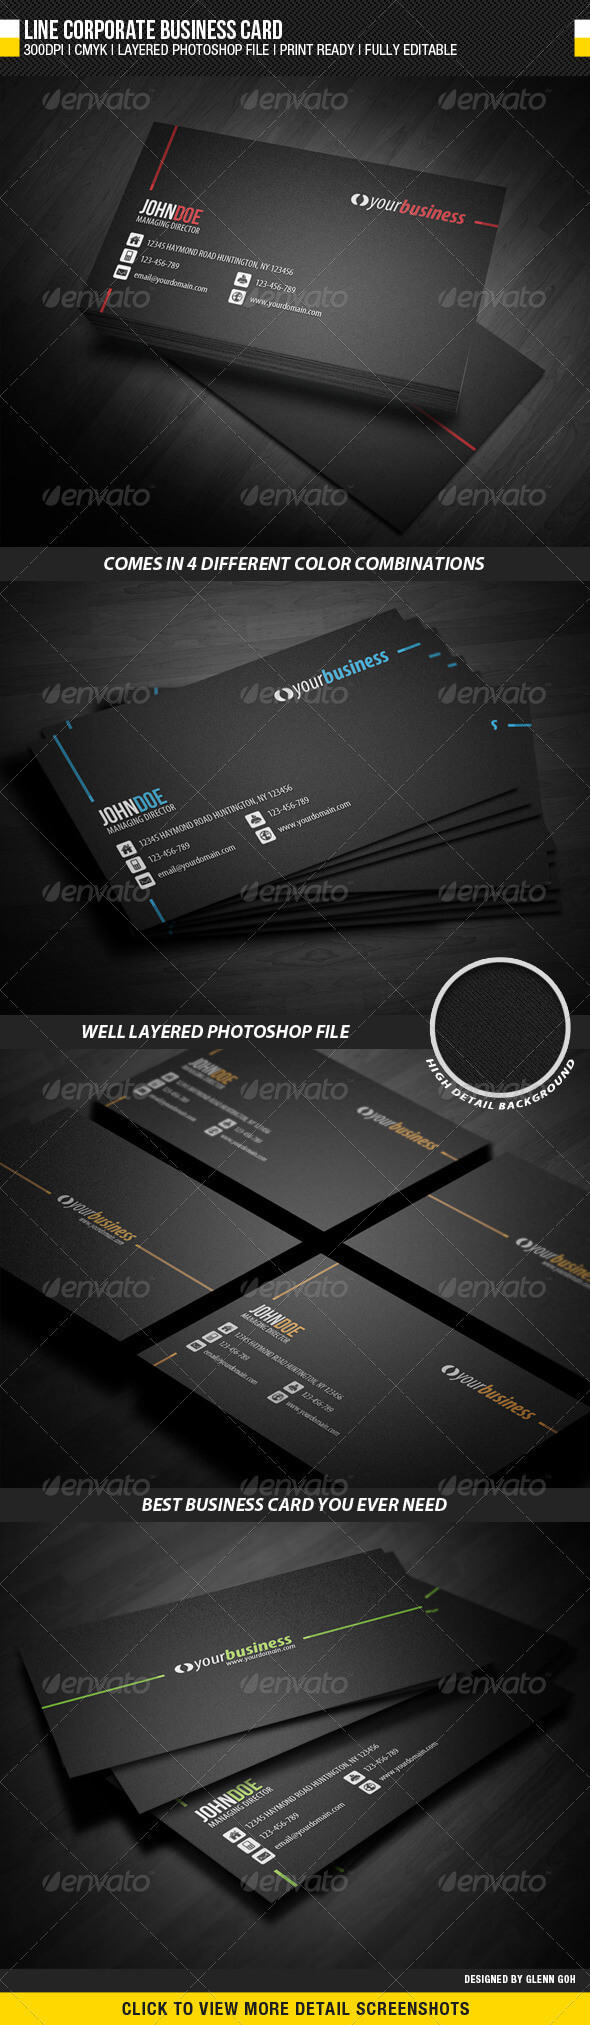 Business Card Templates & Designs From Graphicriver Regarding Construction Business Card Templates Download Free